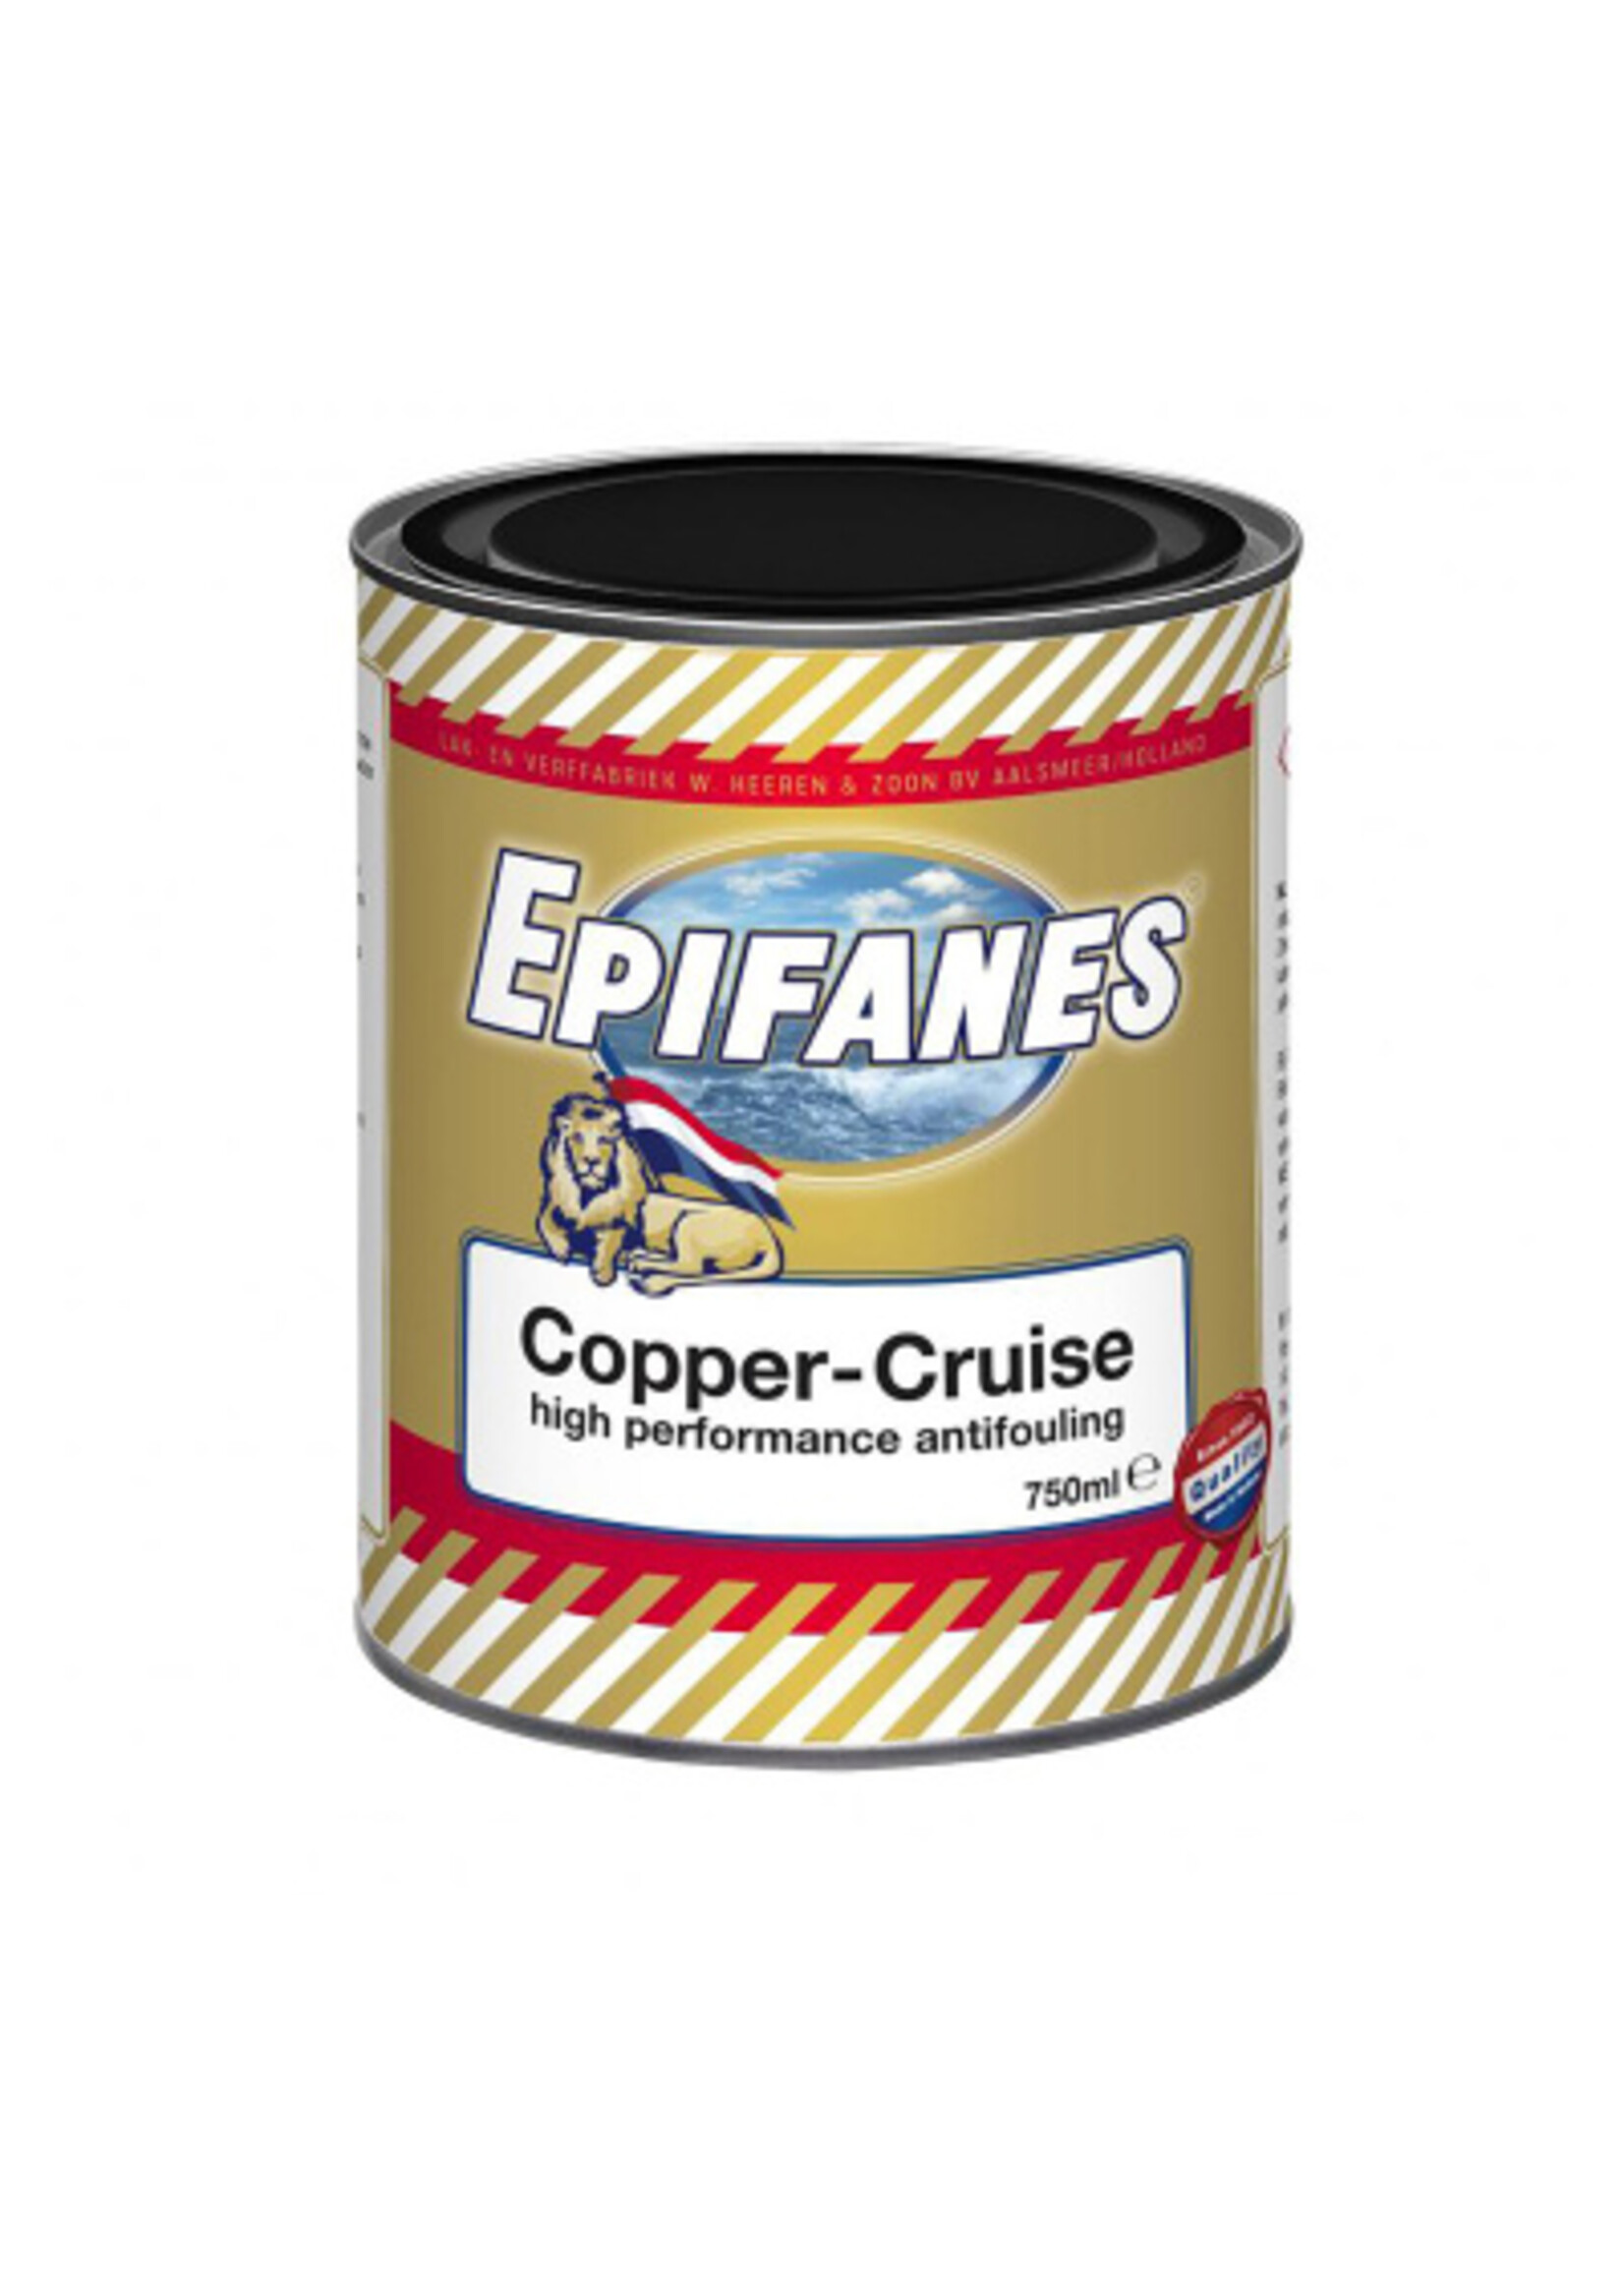 Epifanes Copper-Cruise - Antifouling Rood